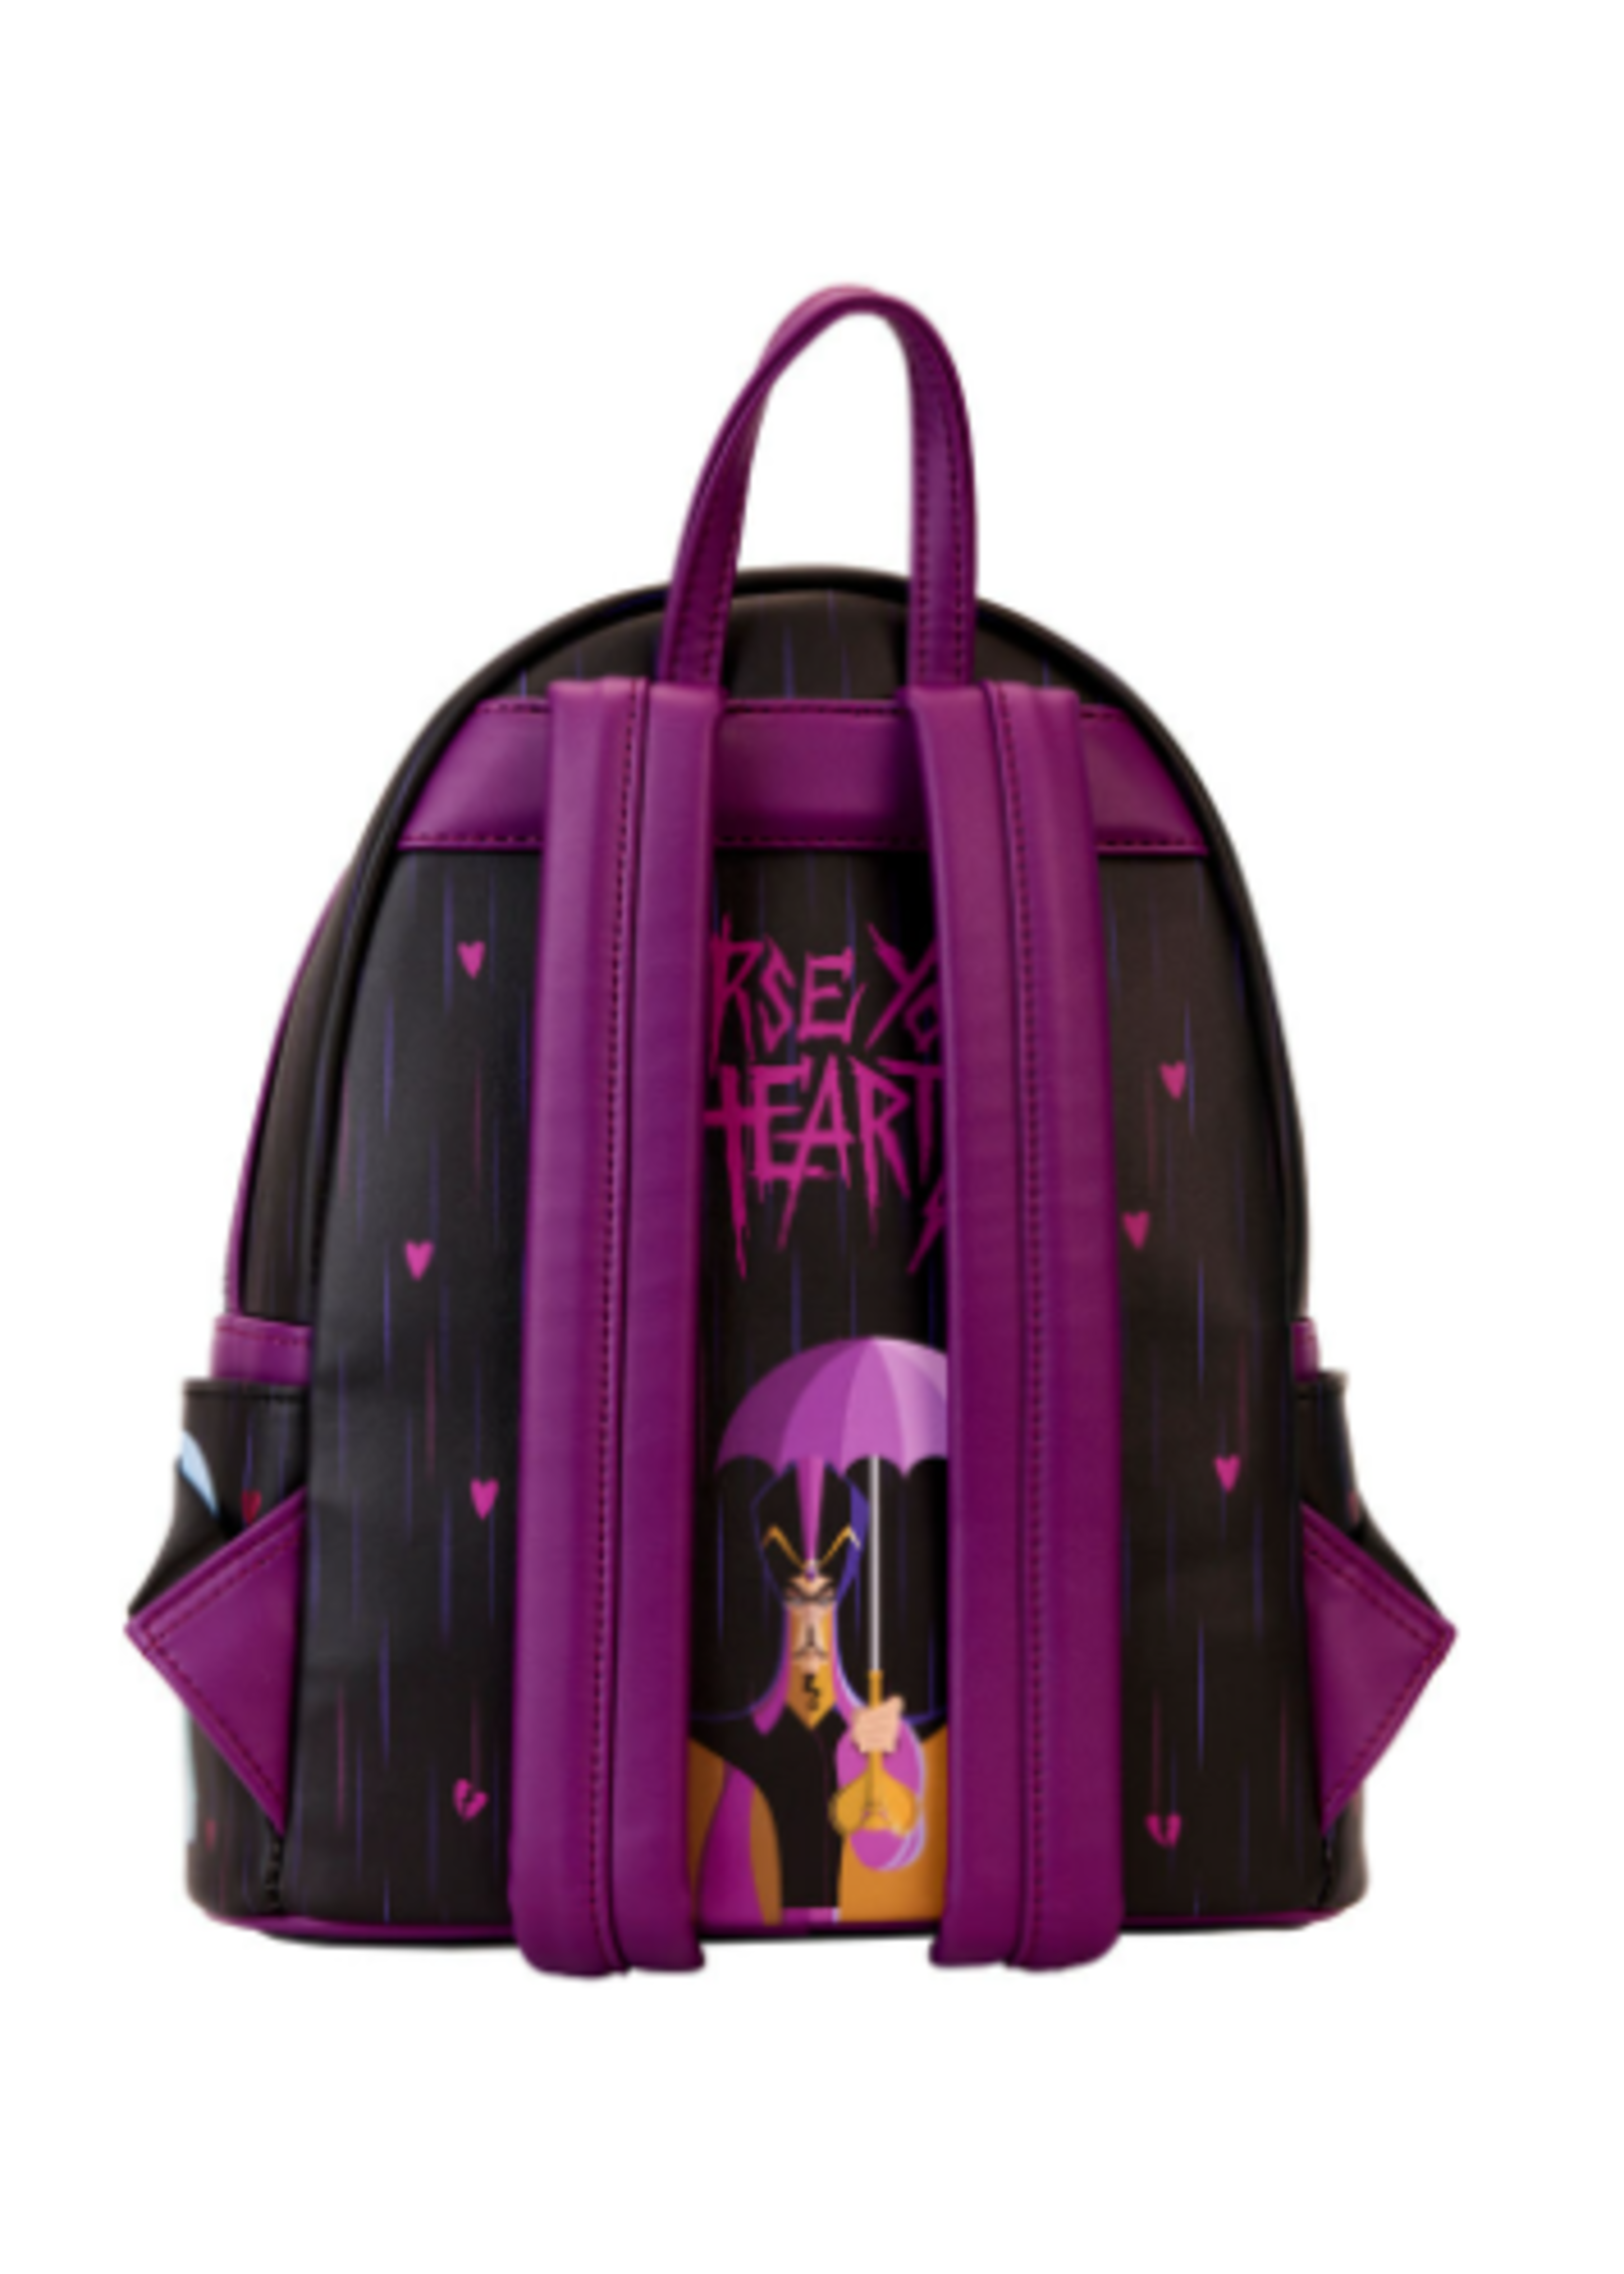 Loungefly LOUNGEFLY DISNEY VILLAINS CURSE YOUR HEARTS BACKPACK